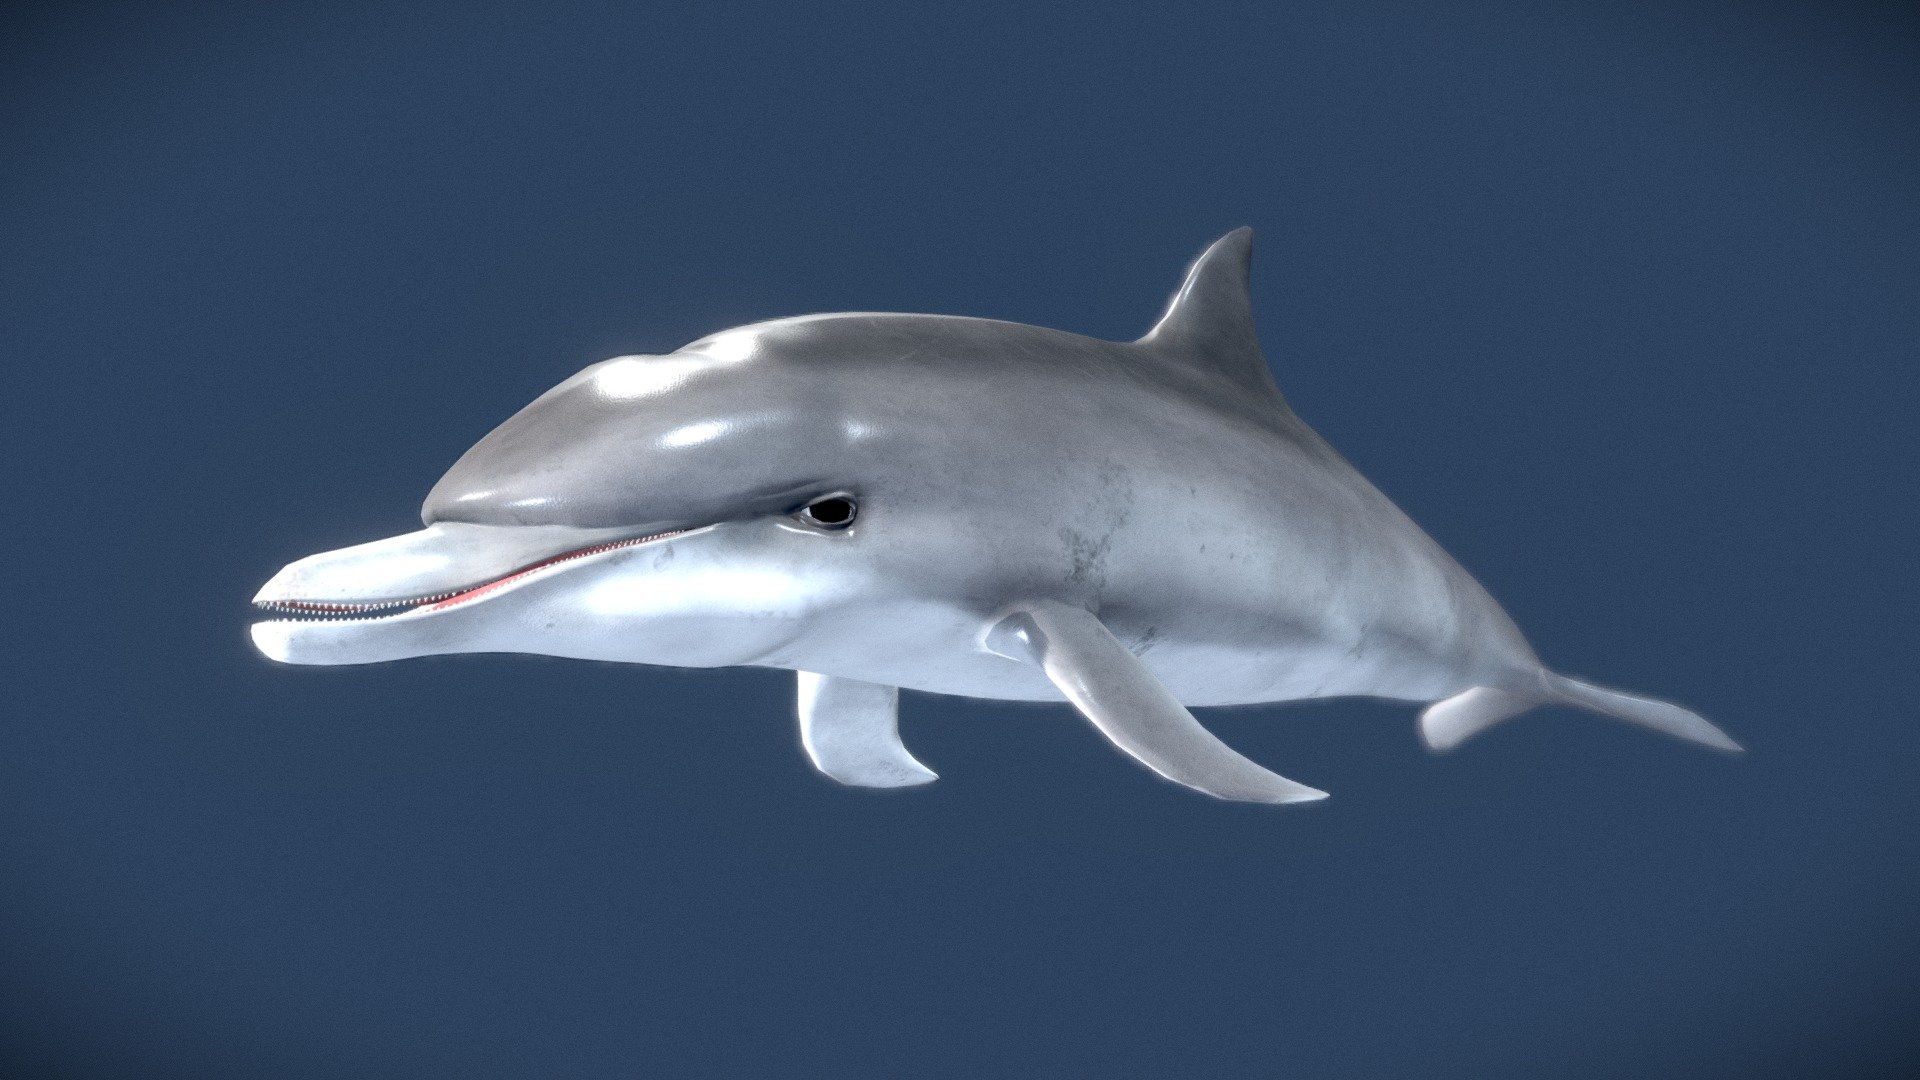 Simple textured but unrigged model of a Bottlenose dolphin with a medium Polycount 3d model